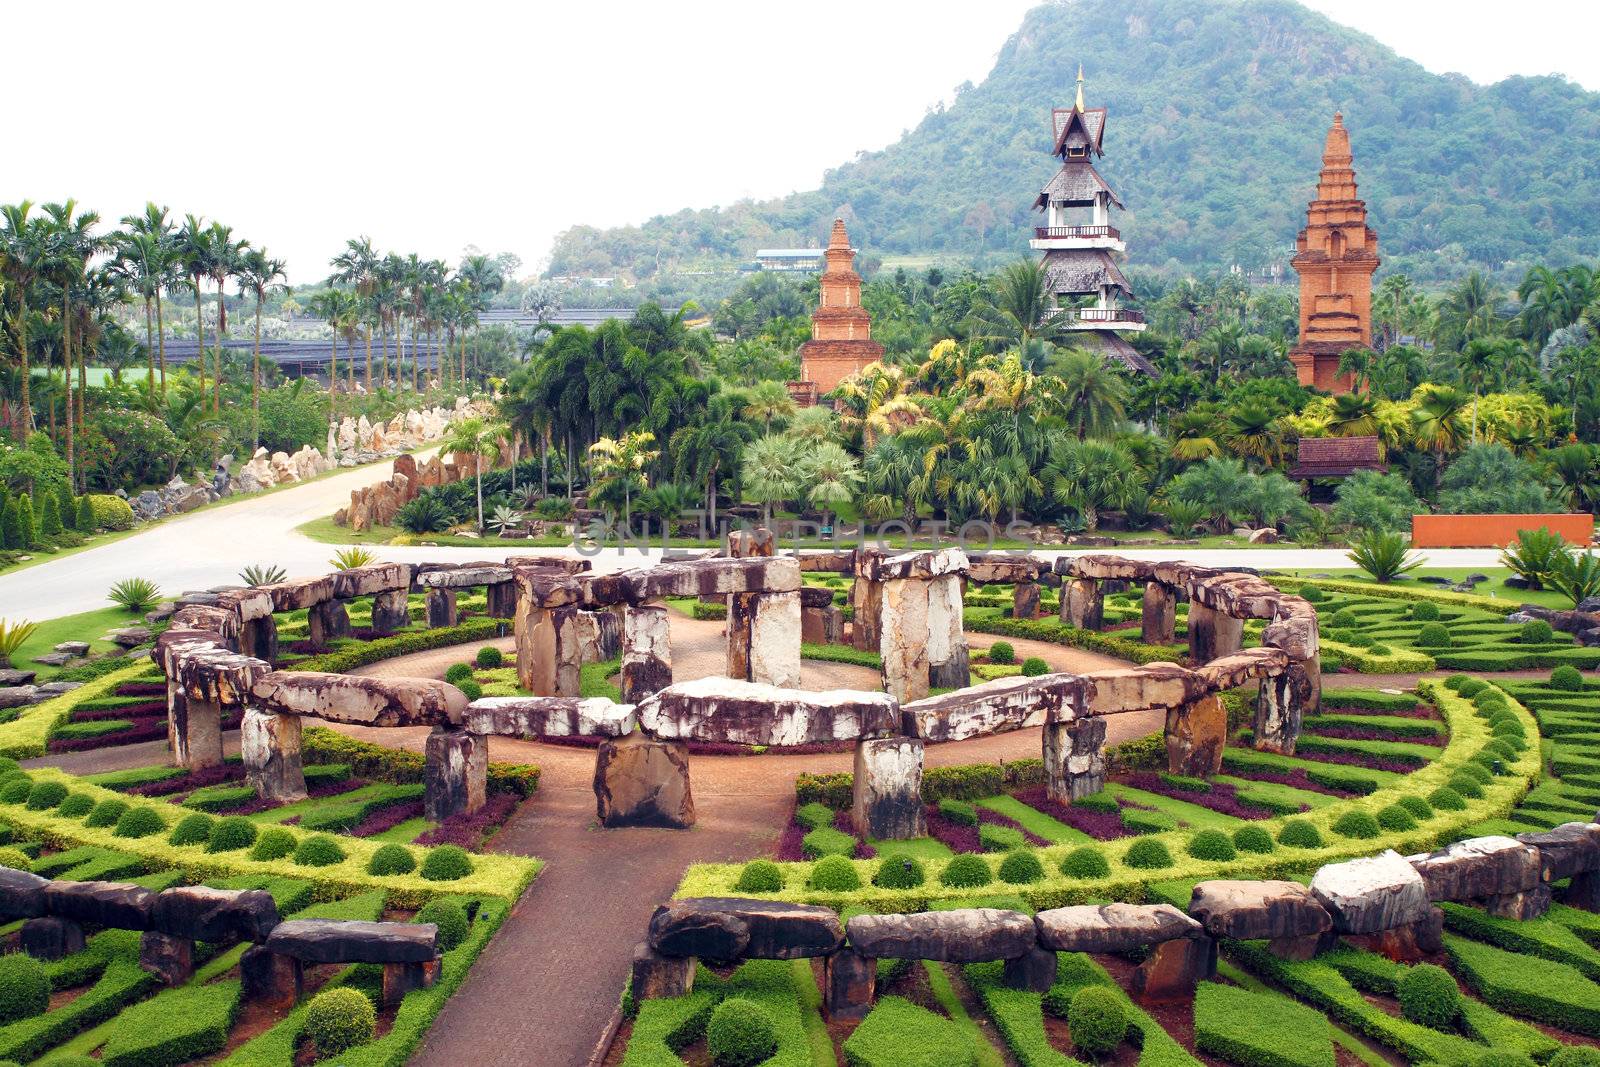 Park nong nooch in Thailand, shrubberies grow in geometric figur by geargodz